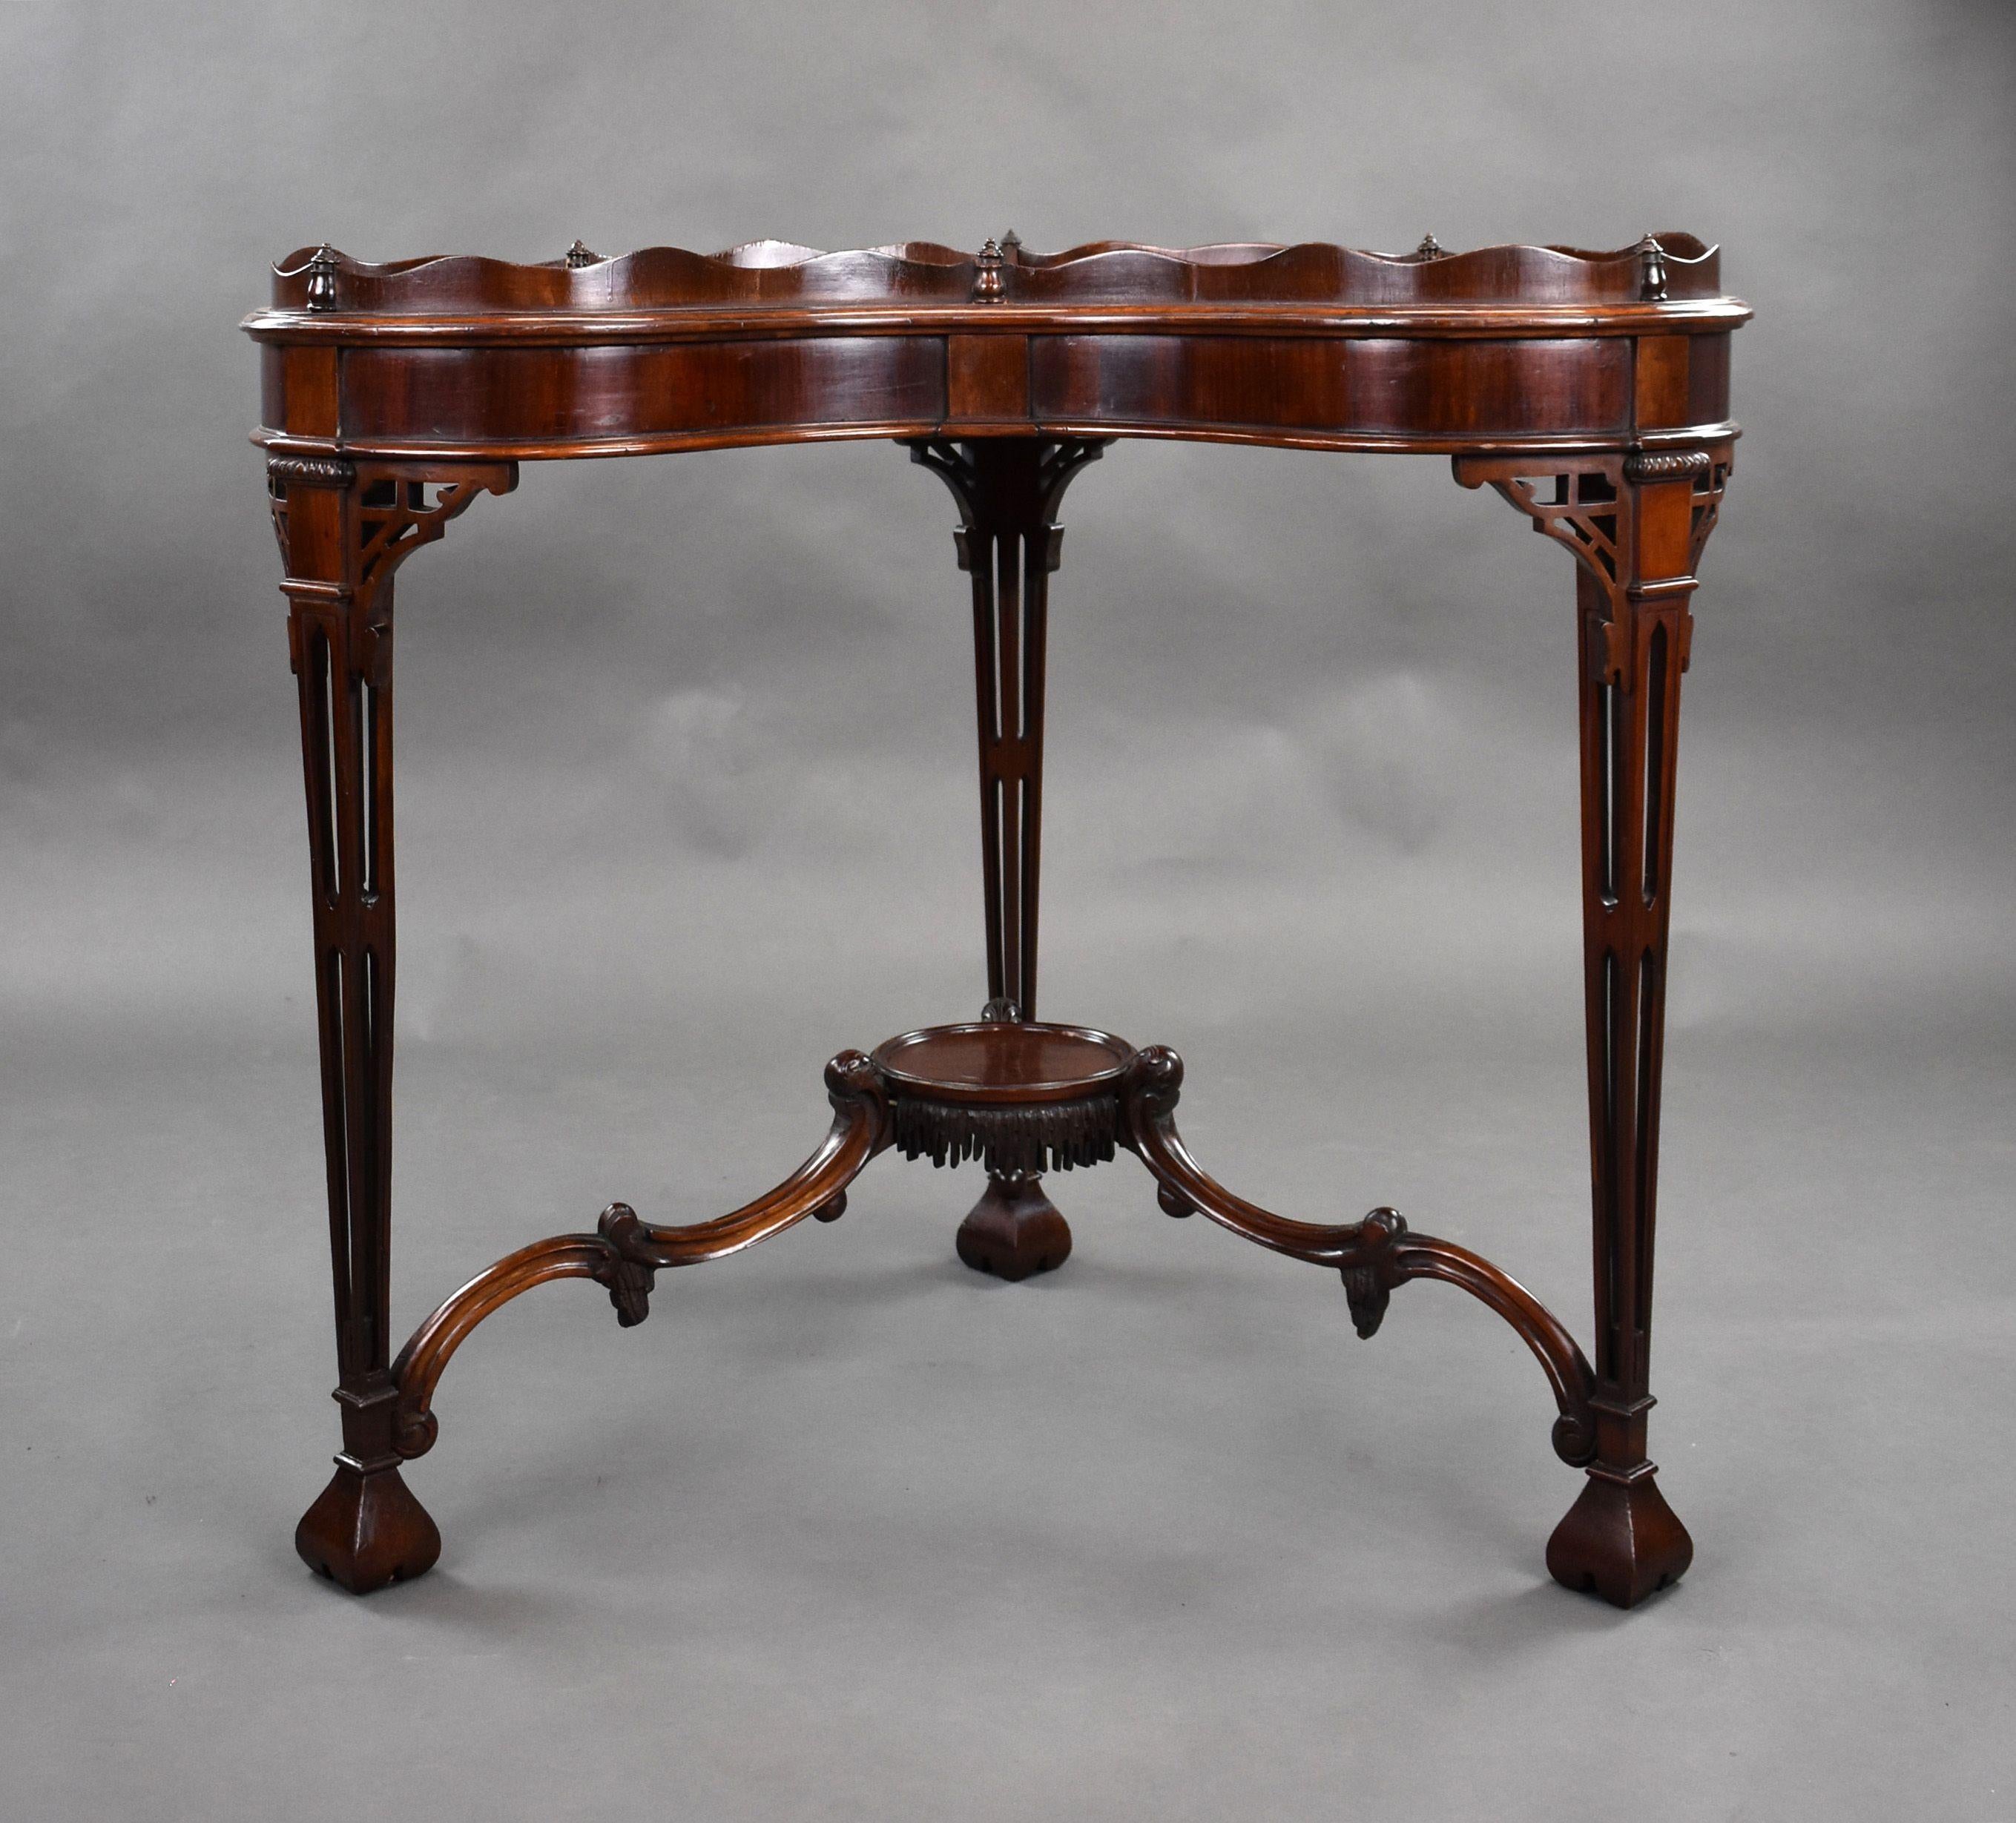 For sale is a good quality, unusual, antique mahogany Chippendale style silver table. Having a shaped galleried top, above three ornate legs with a central under tier, united by an elegant stretcher, this unusual table remains in very good condition